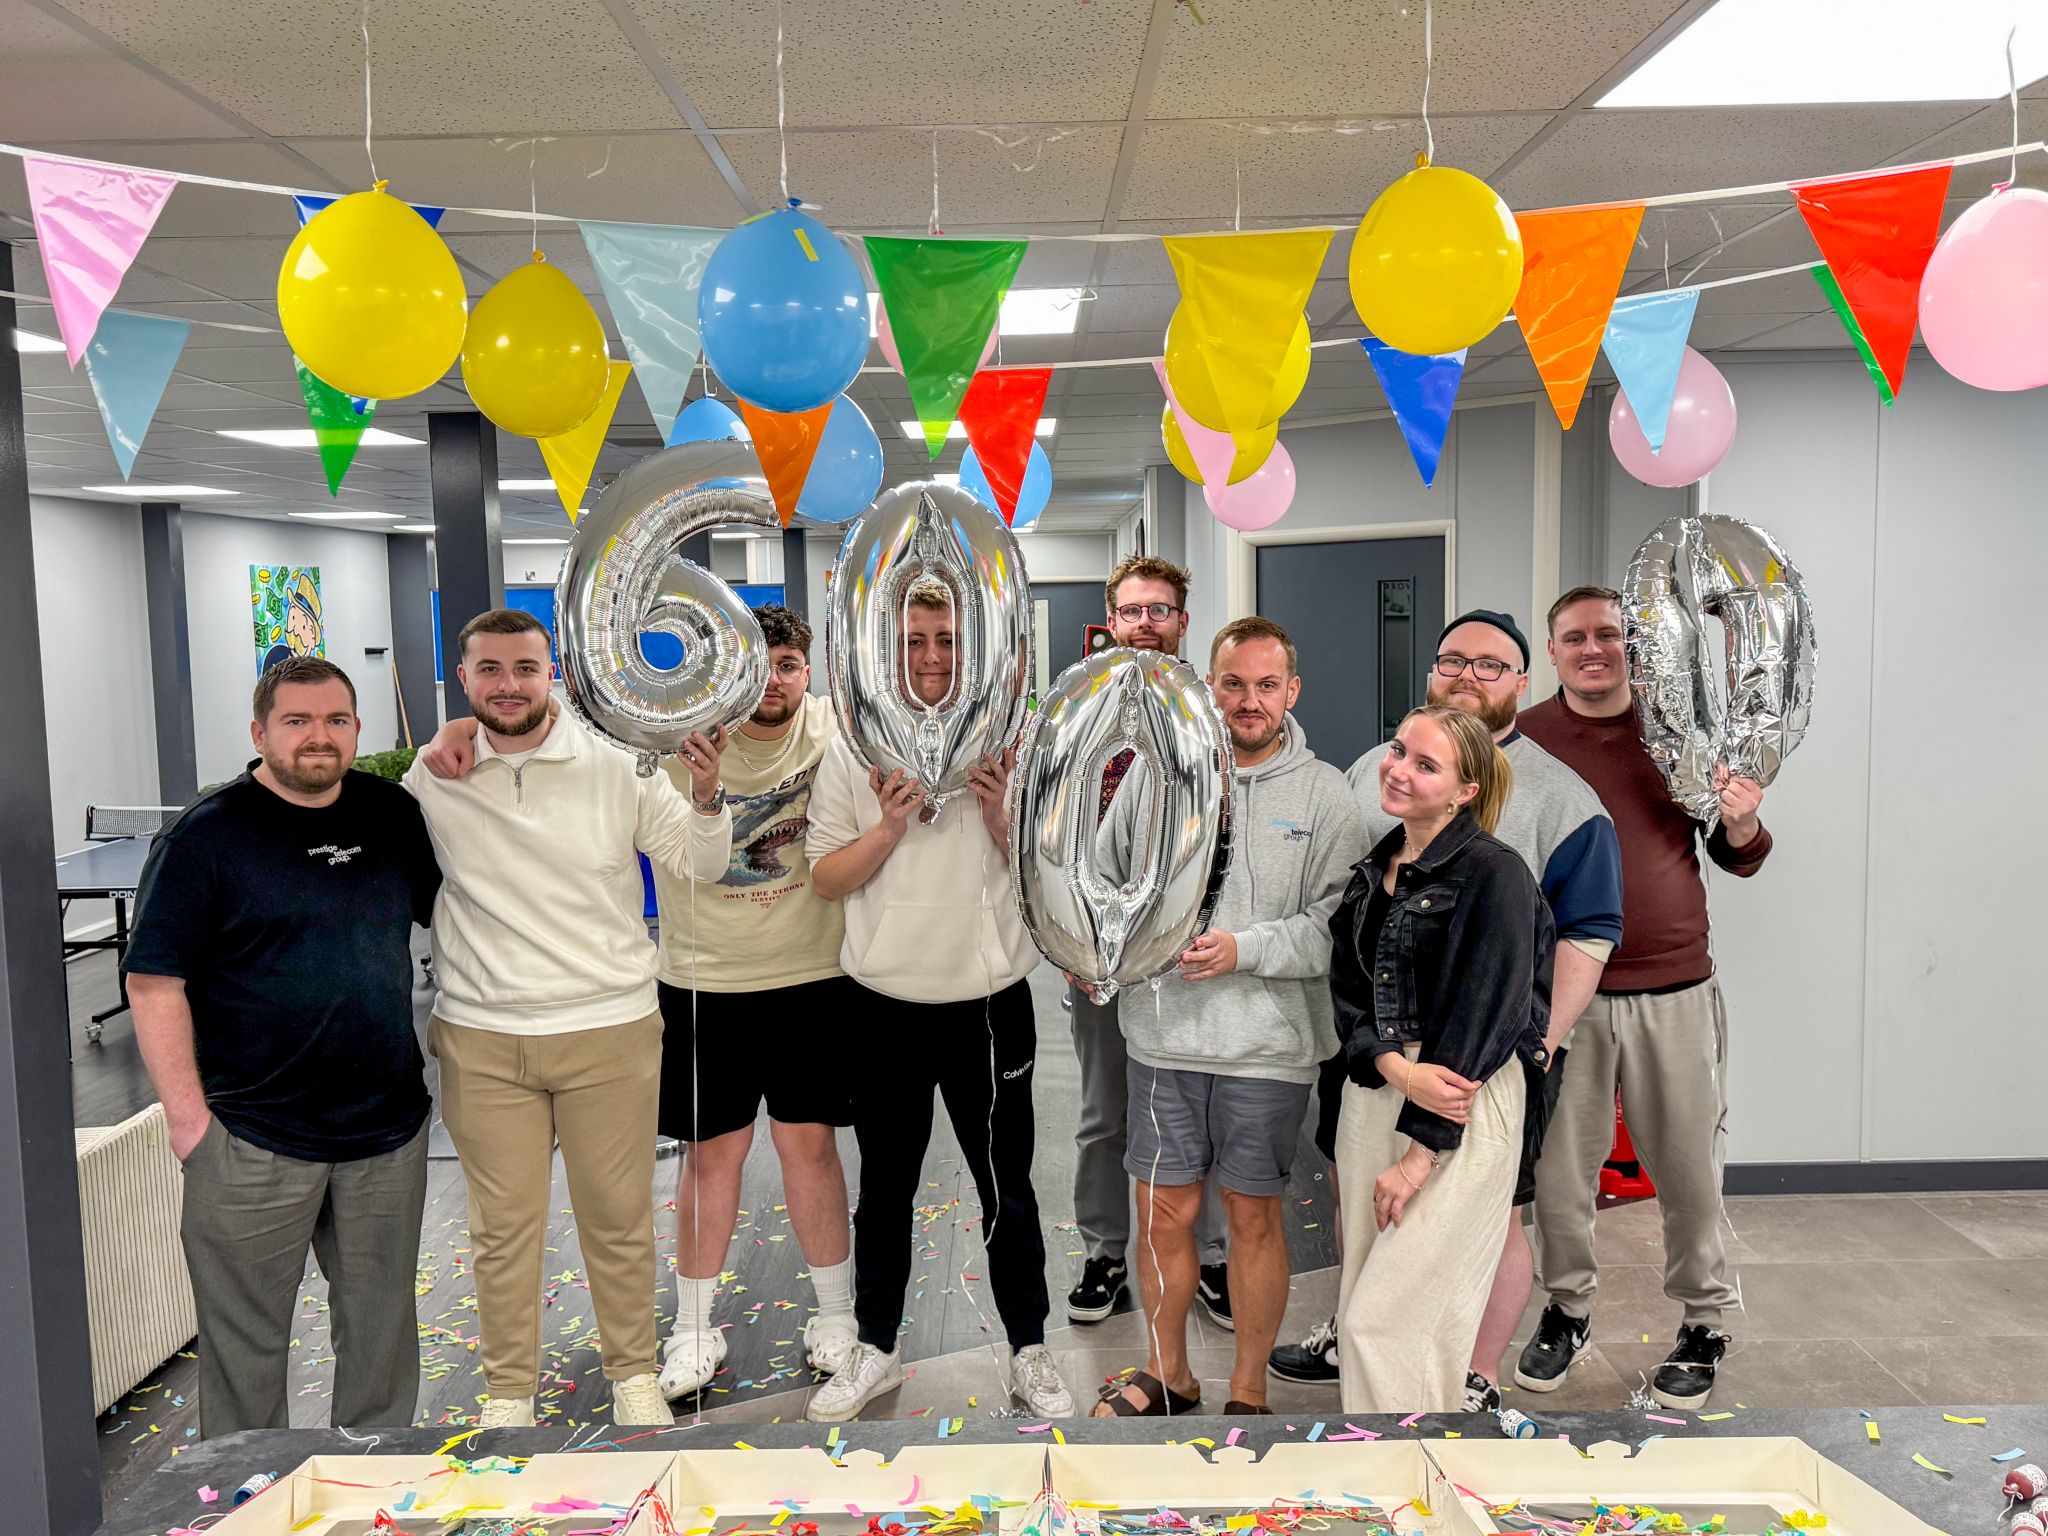 A group photo of the Prestige Telecom Group team, celebrating 6000 Trustpilot reviews with balloons that shape the number '6000'